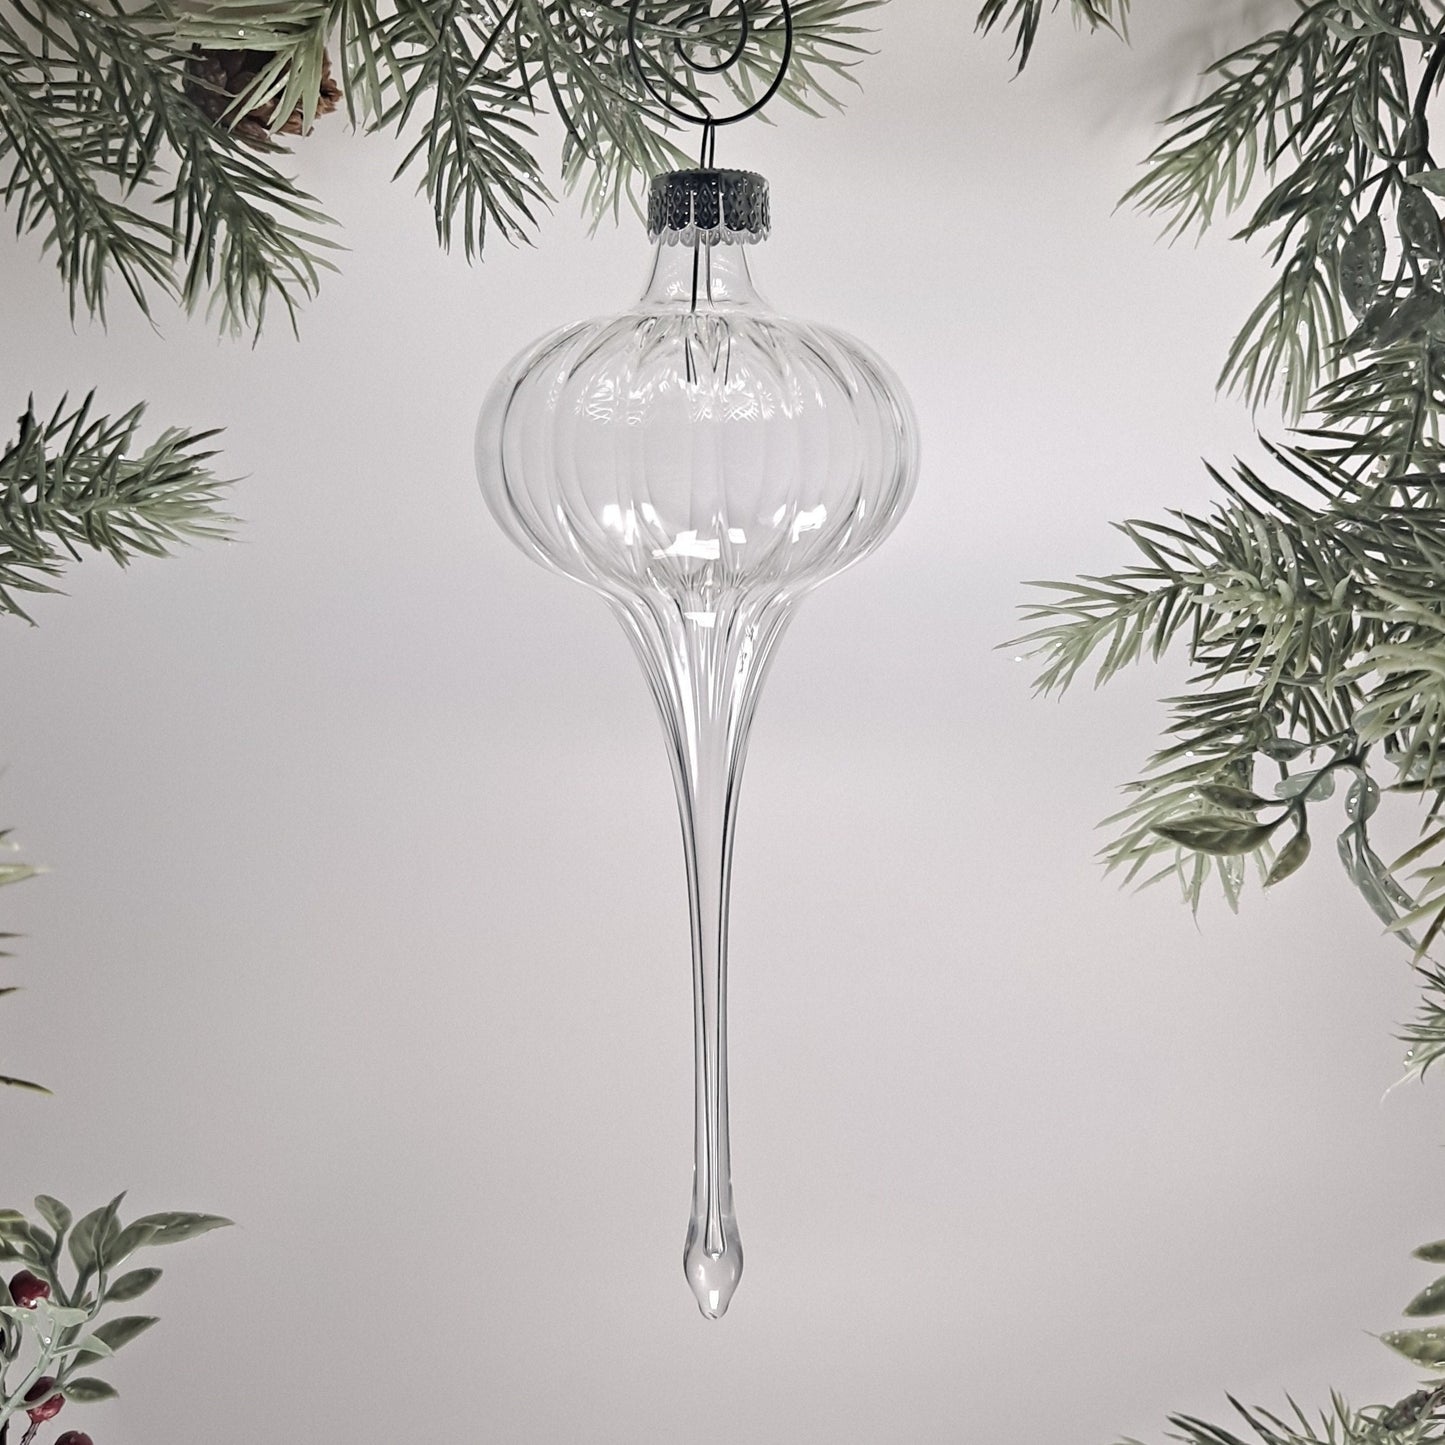 Large Hand Blown Glass Victorian Ornament Collection